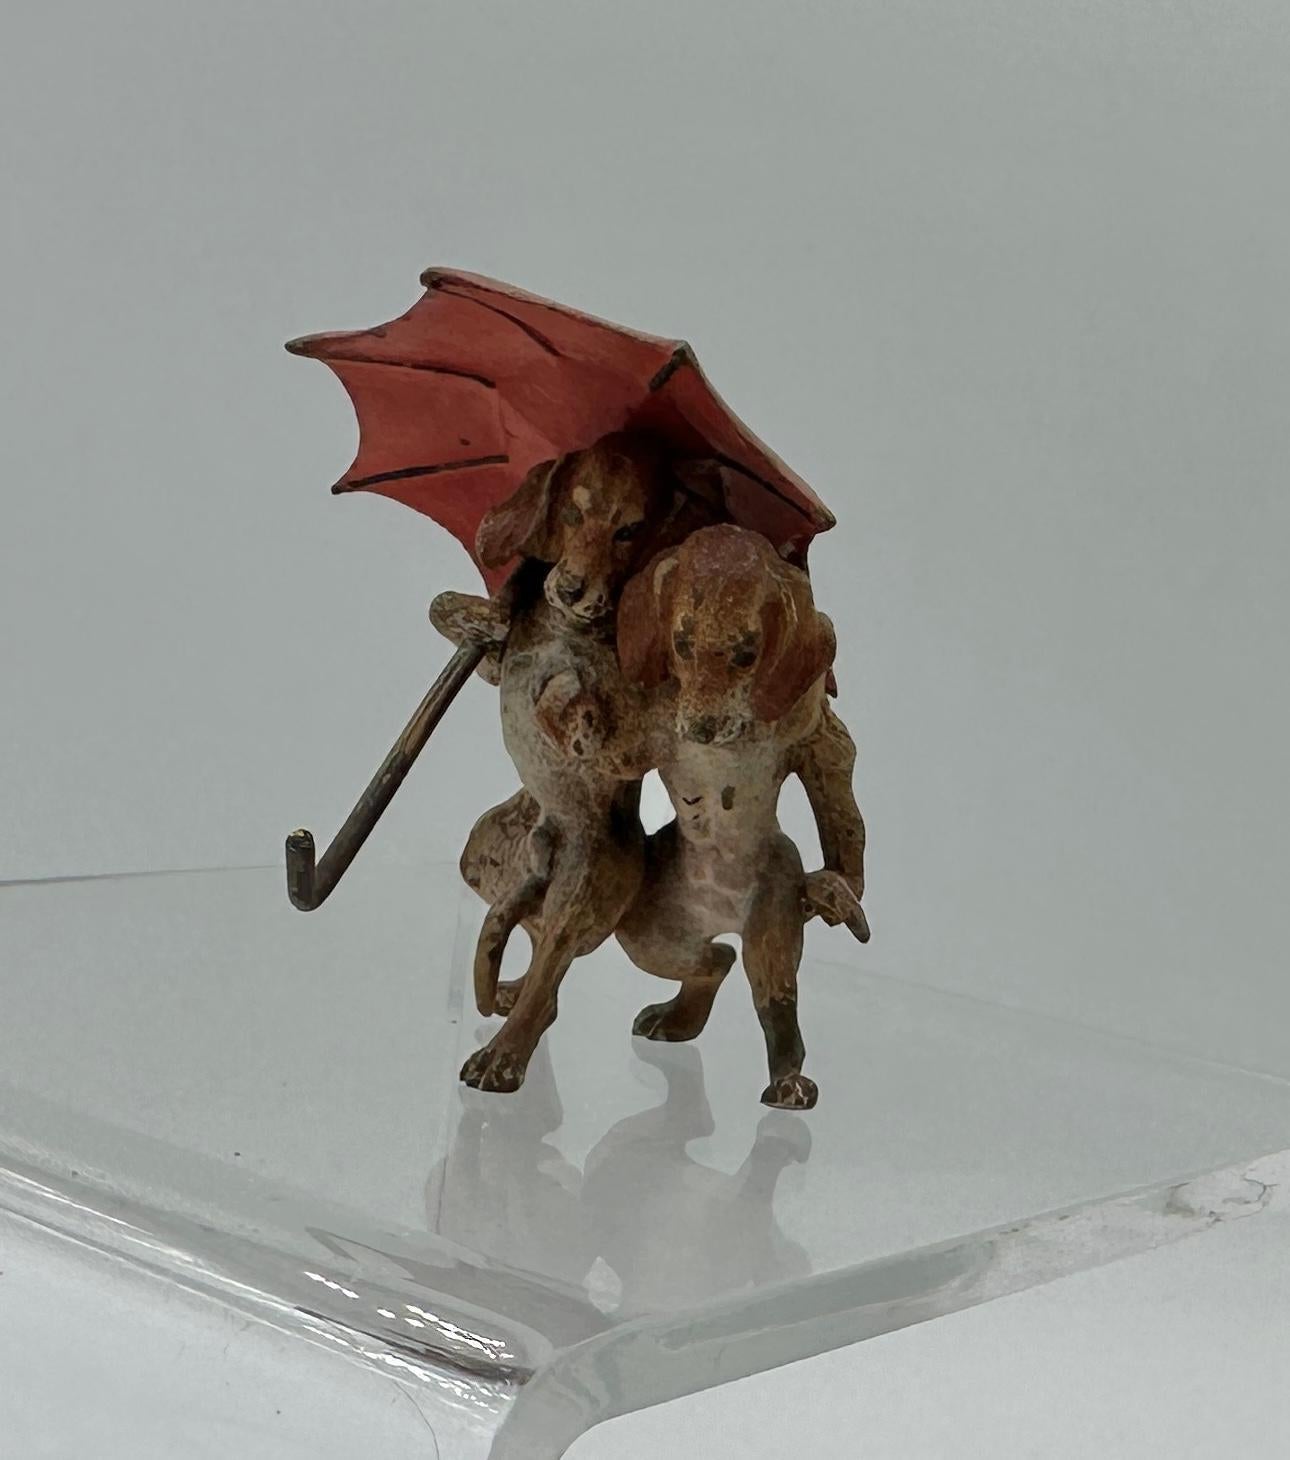 THIS IS A SUPERB ANTIQUE AUSTRIAN VIENNA BRONZE OF TWO DACHSHUND DOGS WALKING UNDER AN UMBRELLA.
This wonderful antique Austrian Vienna Bronze (Bronze de Vienne, Wiener Bronze, Cold Painted Bronze) dates to circa 1900-1920.  The bronze is of the